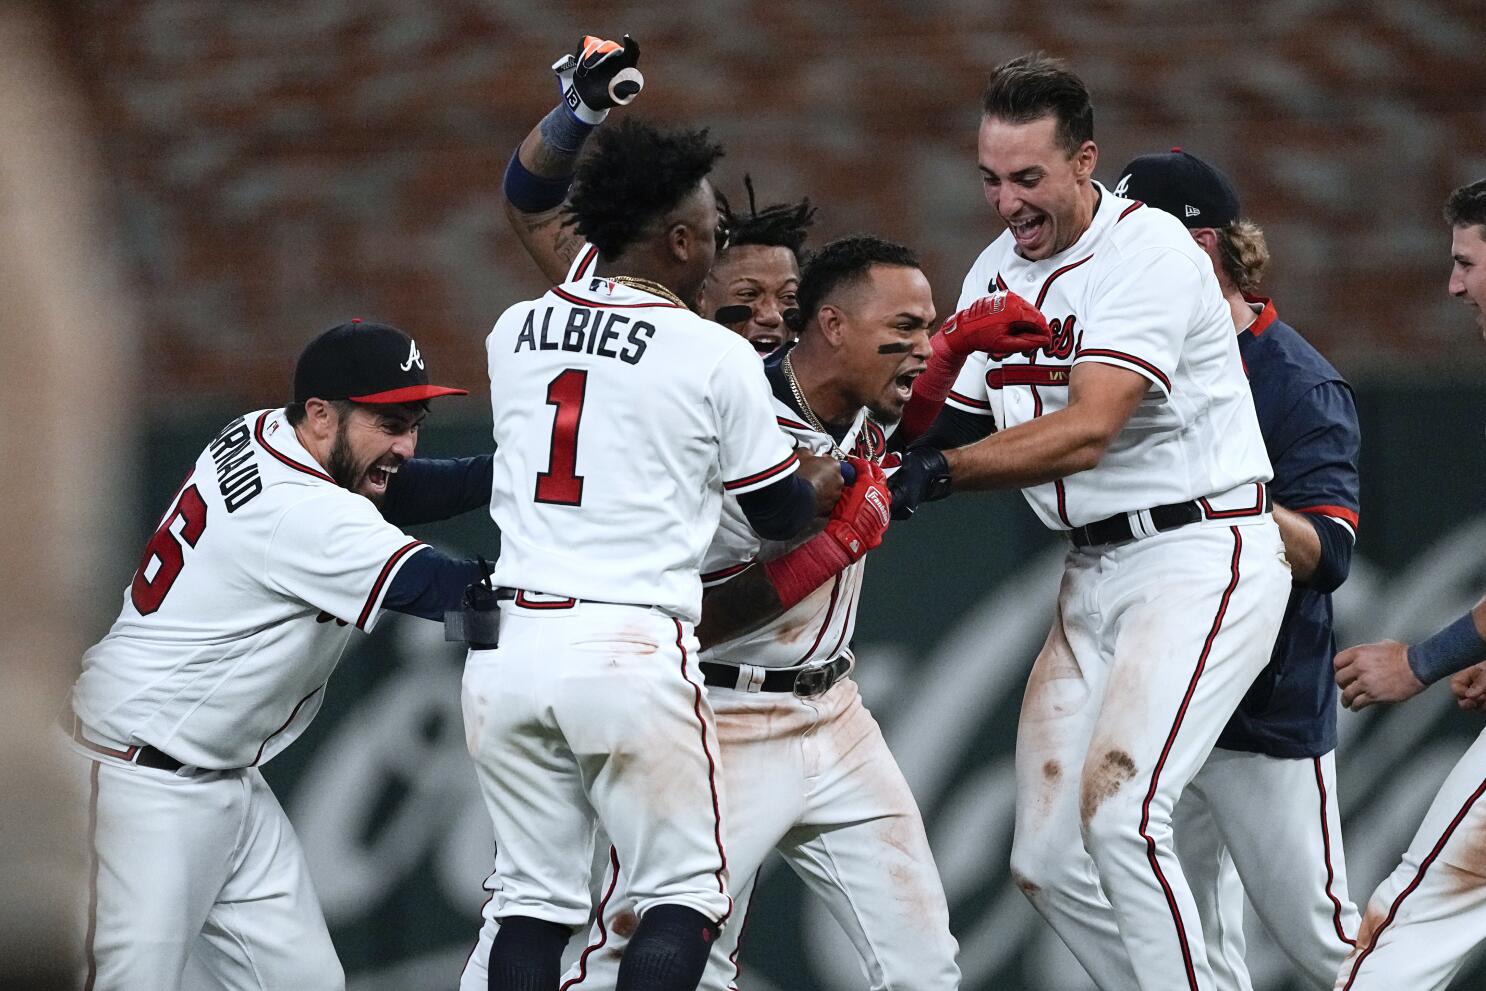 Orlando Arcia, Braves walk off with 7-6 win over Padres - The San